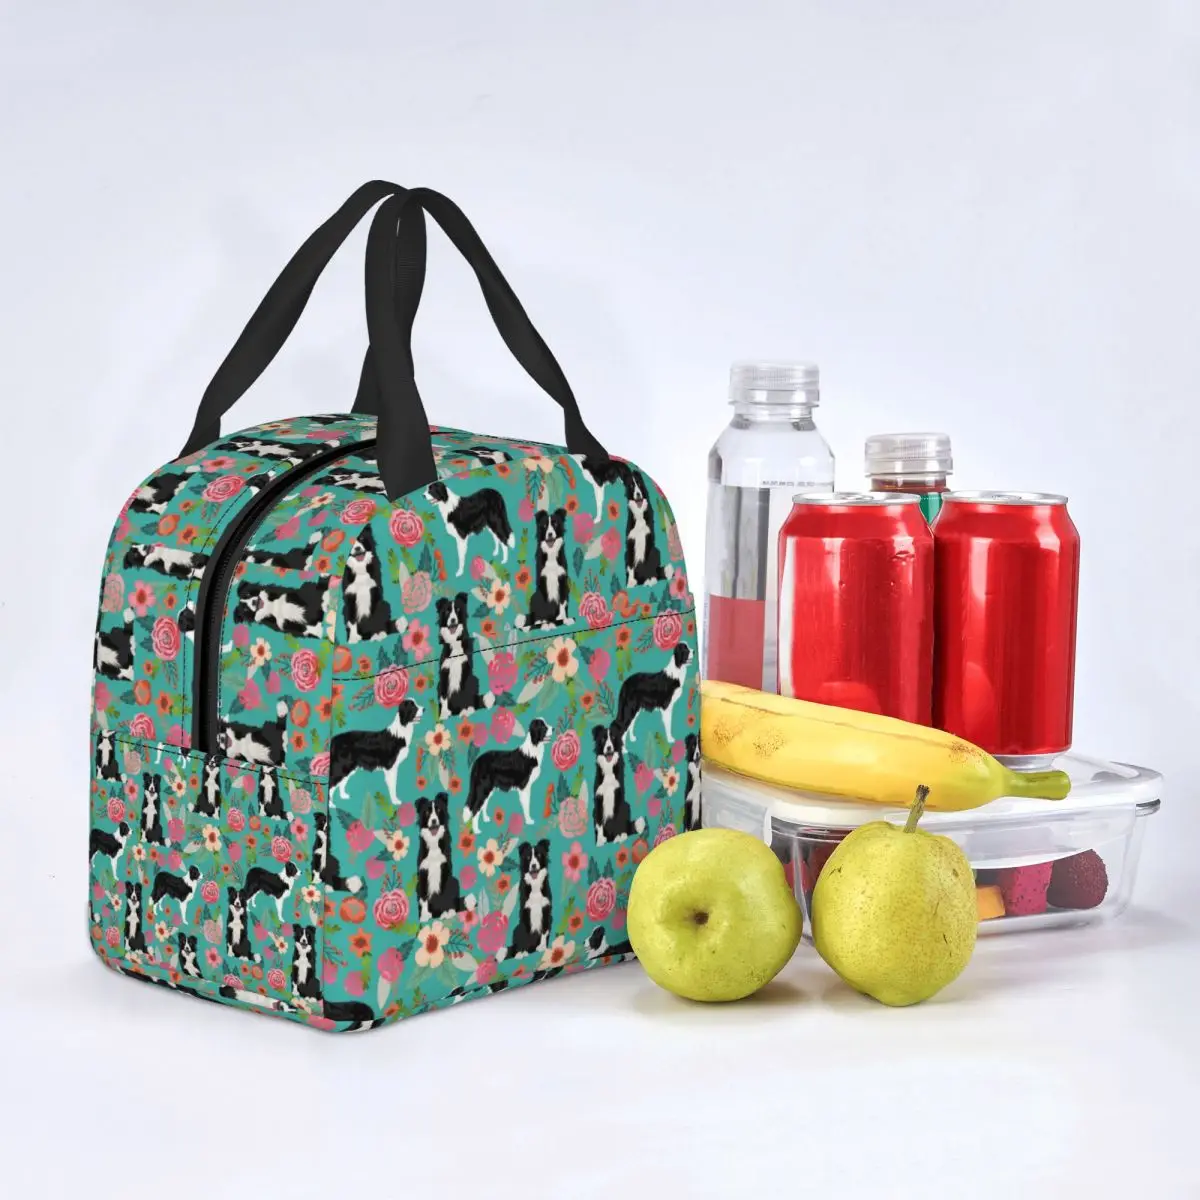 Border Collie Dog Vintage Florals Lunch Bag Portable Insulated Cooler Animal Thermal Cold Food School Lunch Box for Women Kids